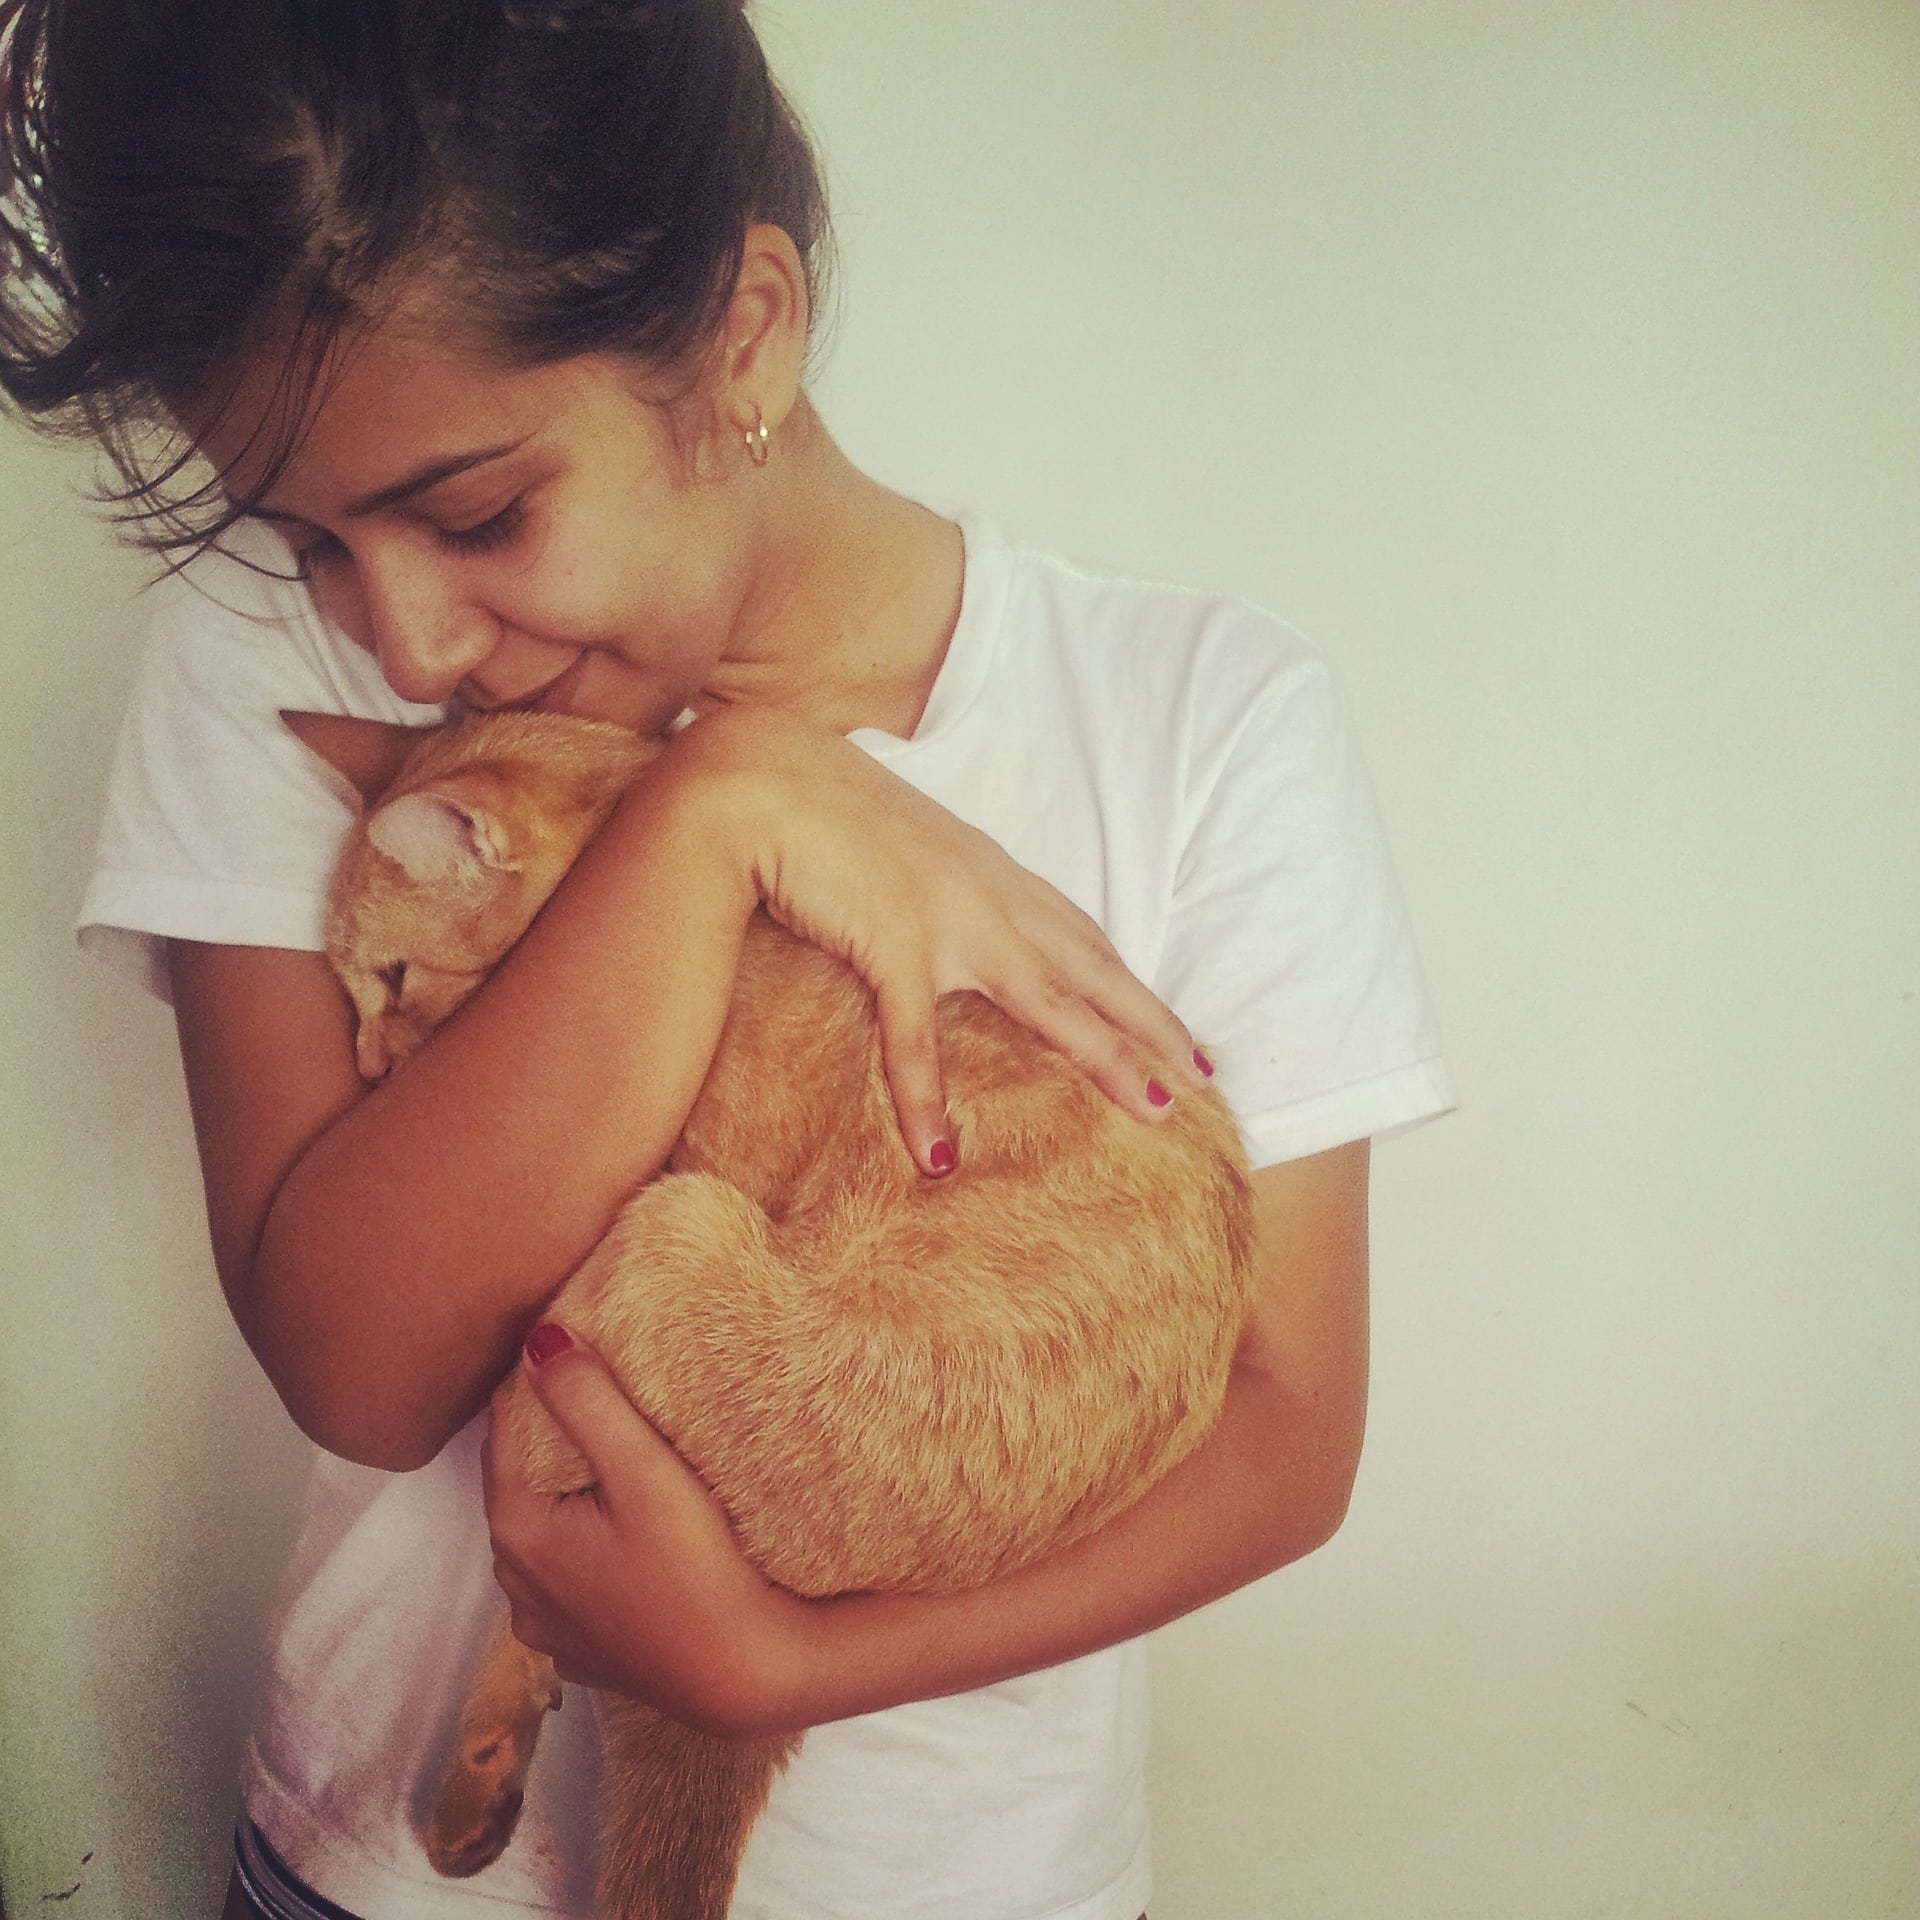 A tween girl holding and cuddling an orange tabby cat